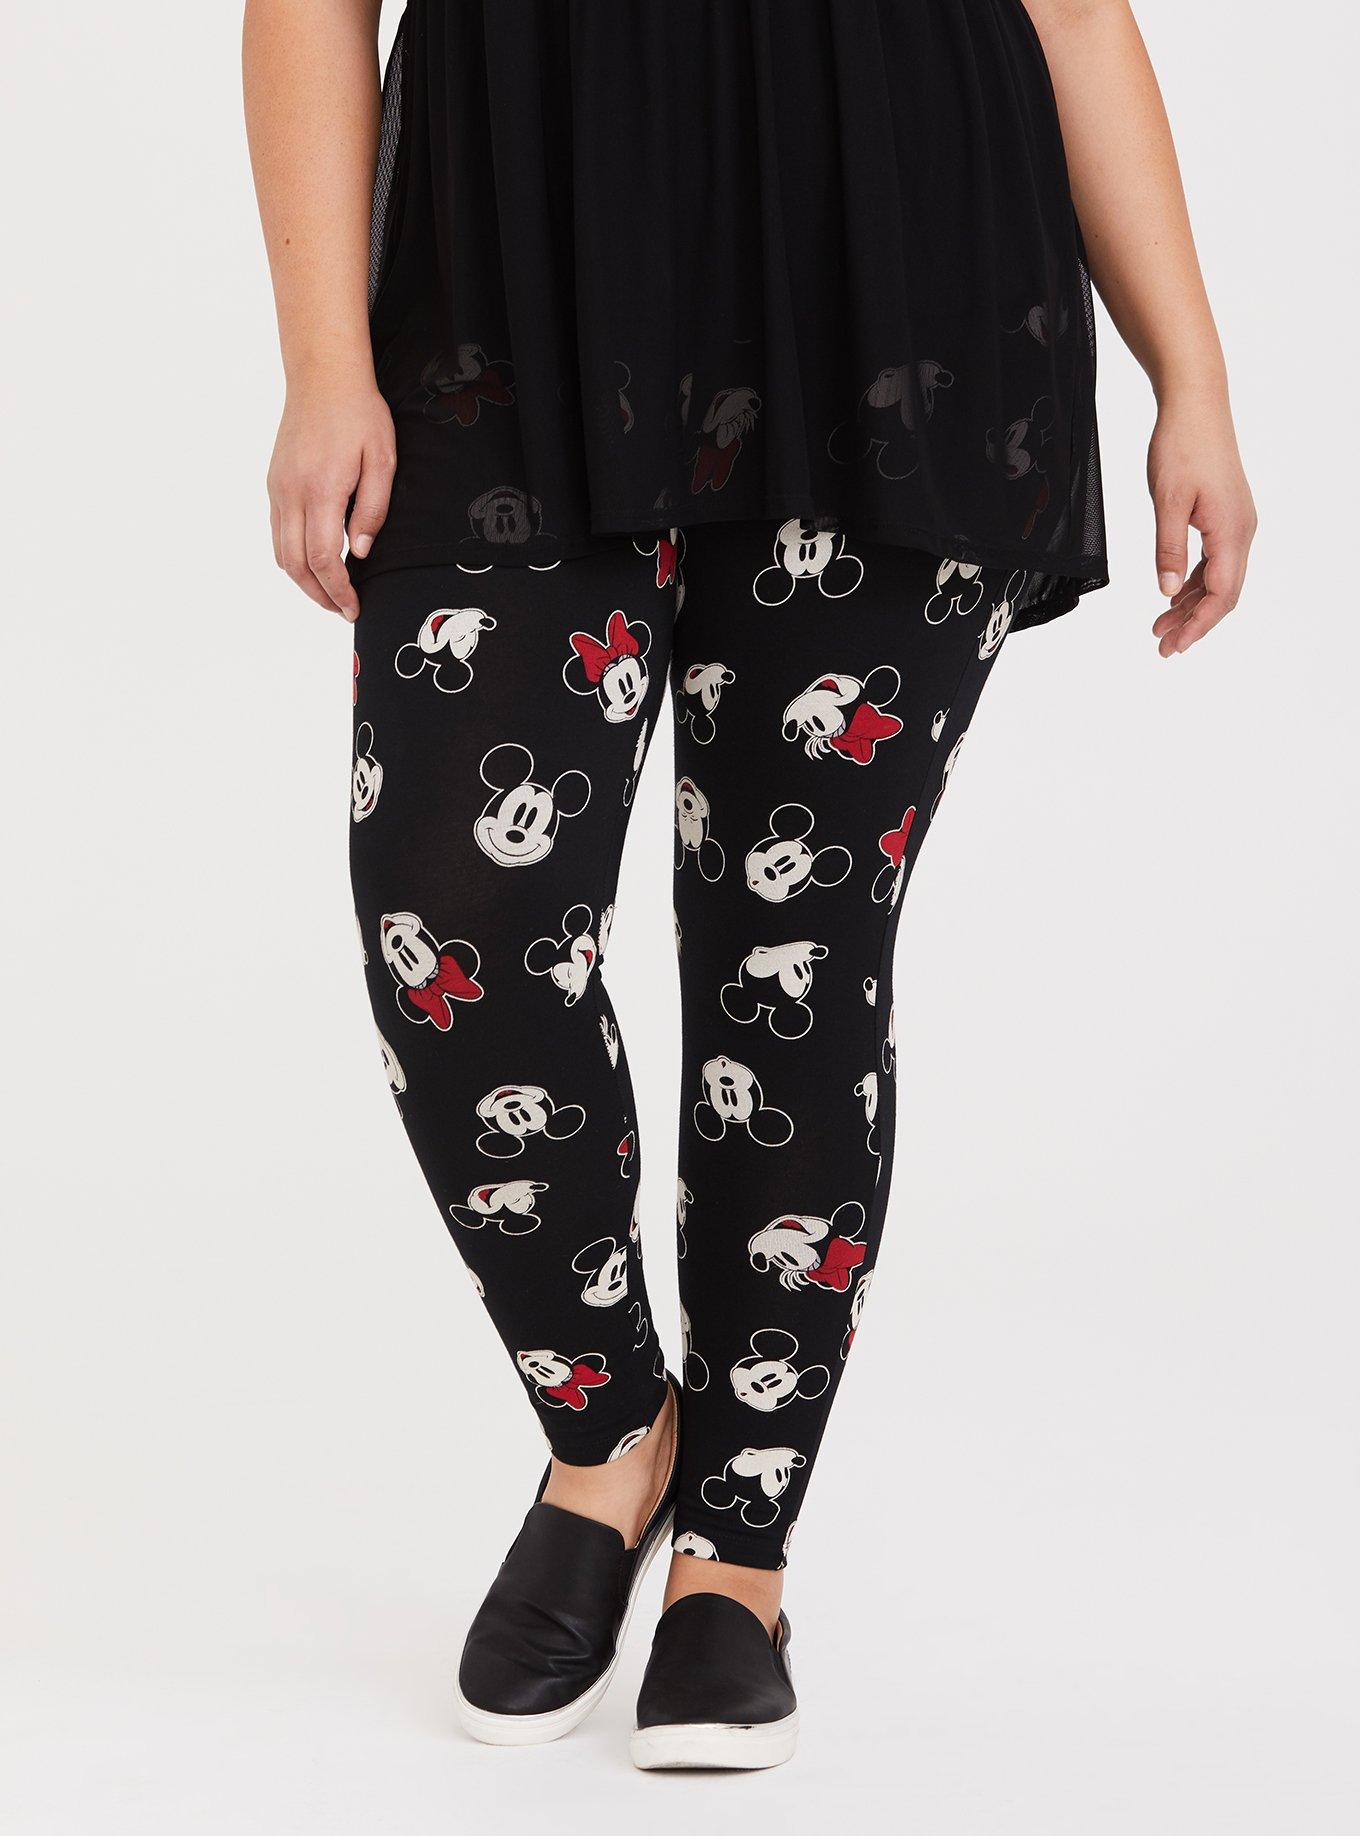 Disney Mickey Mouse and Friends runDisney Leggings for Women — Double Boxed  Toys